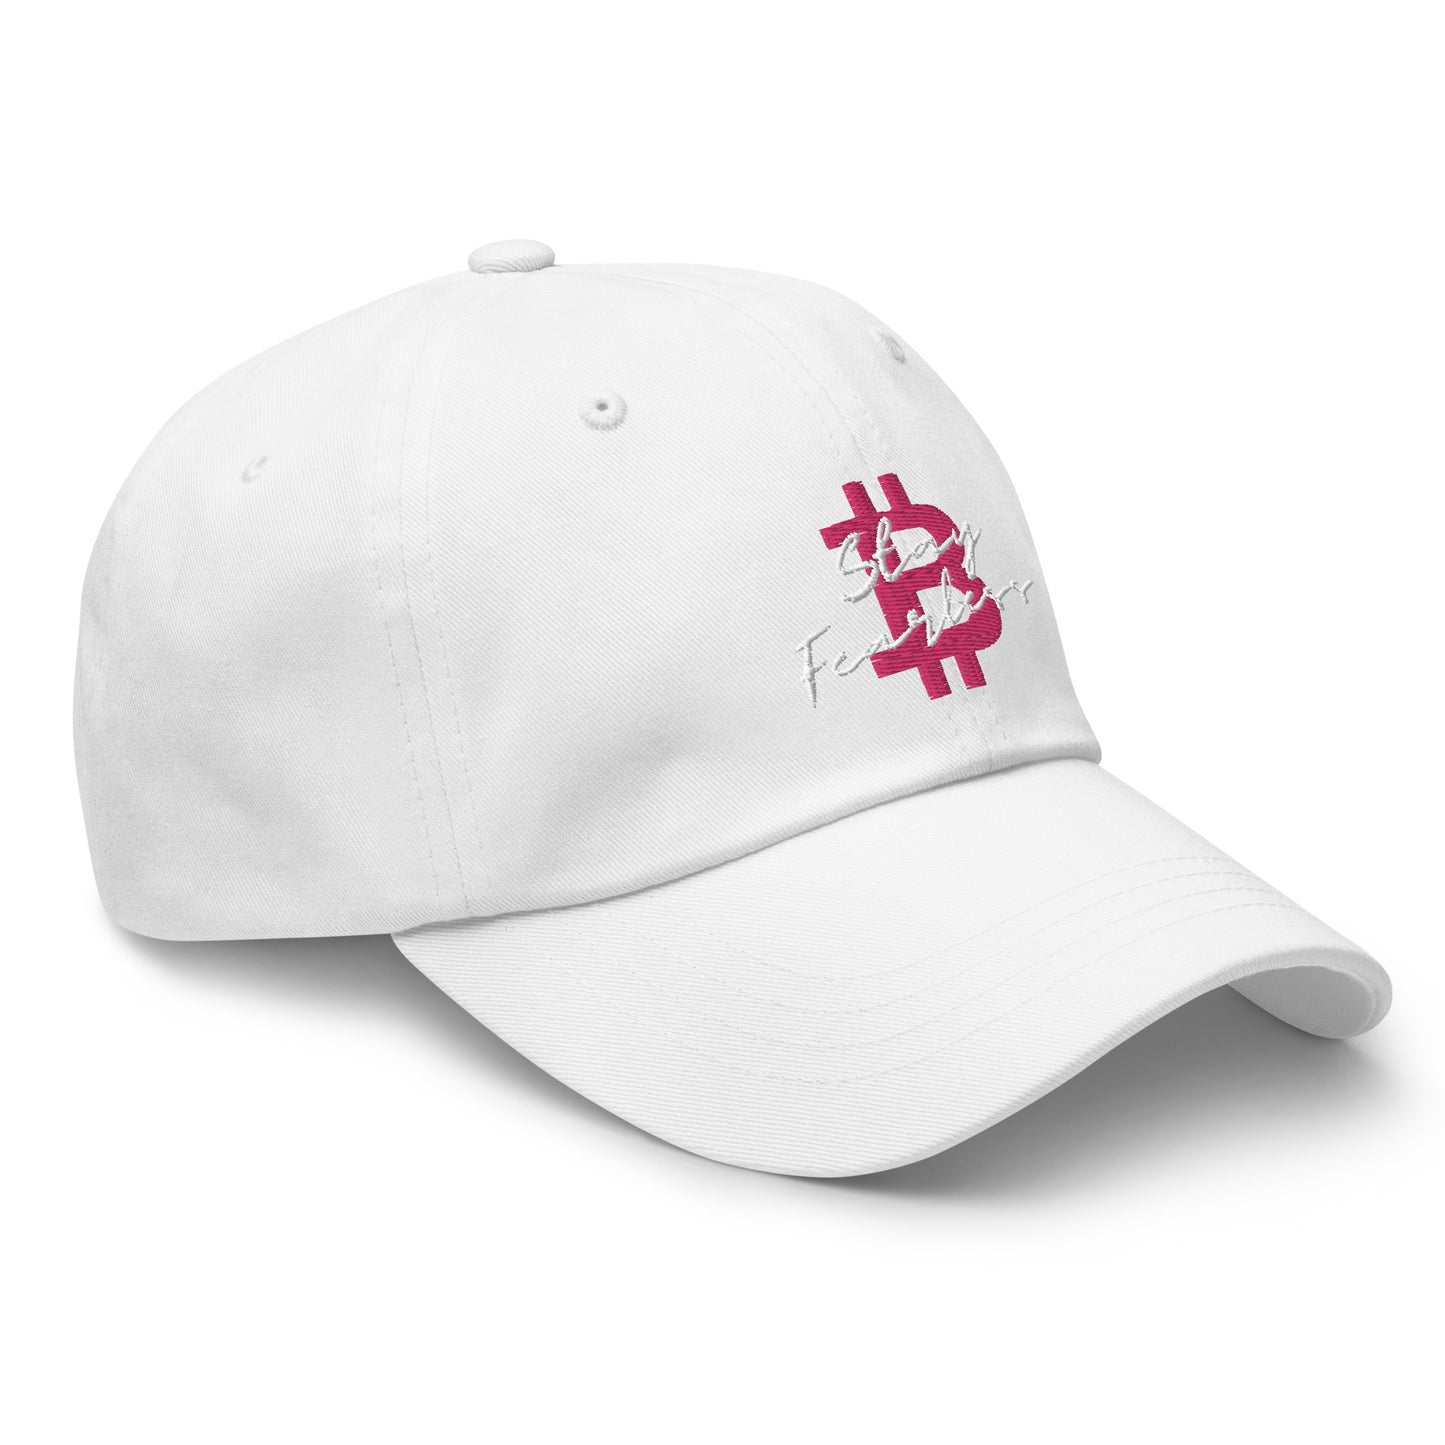 BITCOIN STAY FEARLESS LADIES EDITION Comfort Basecap